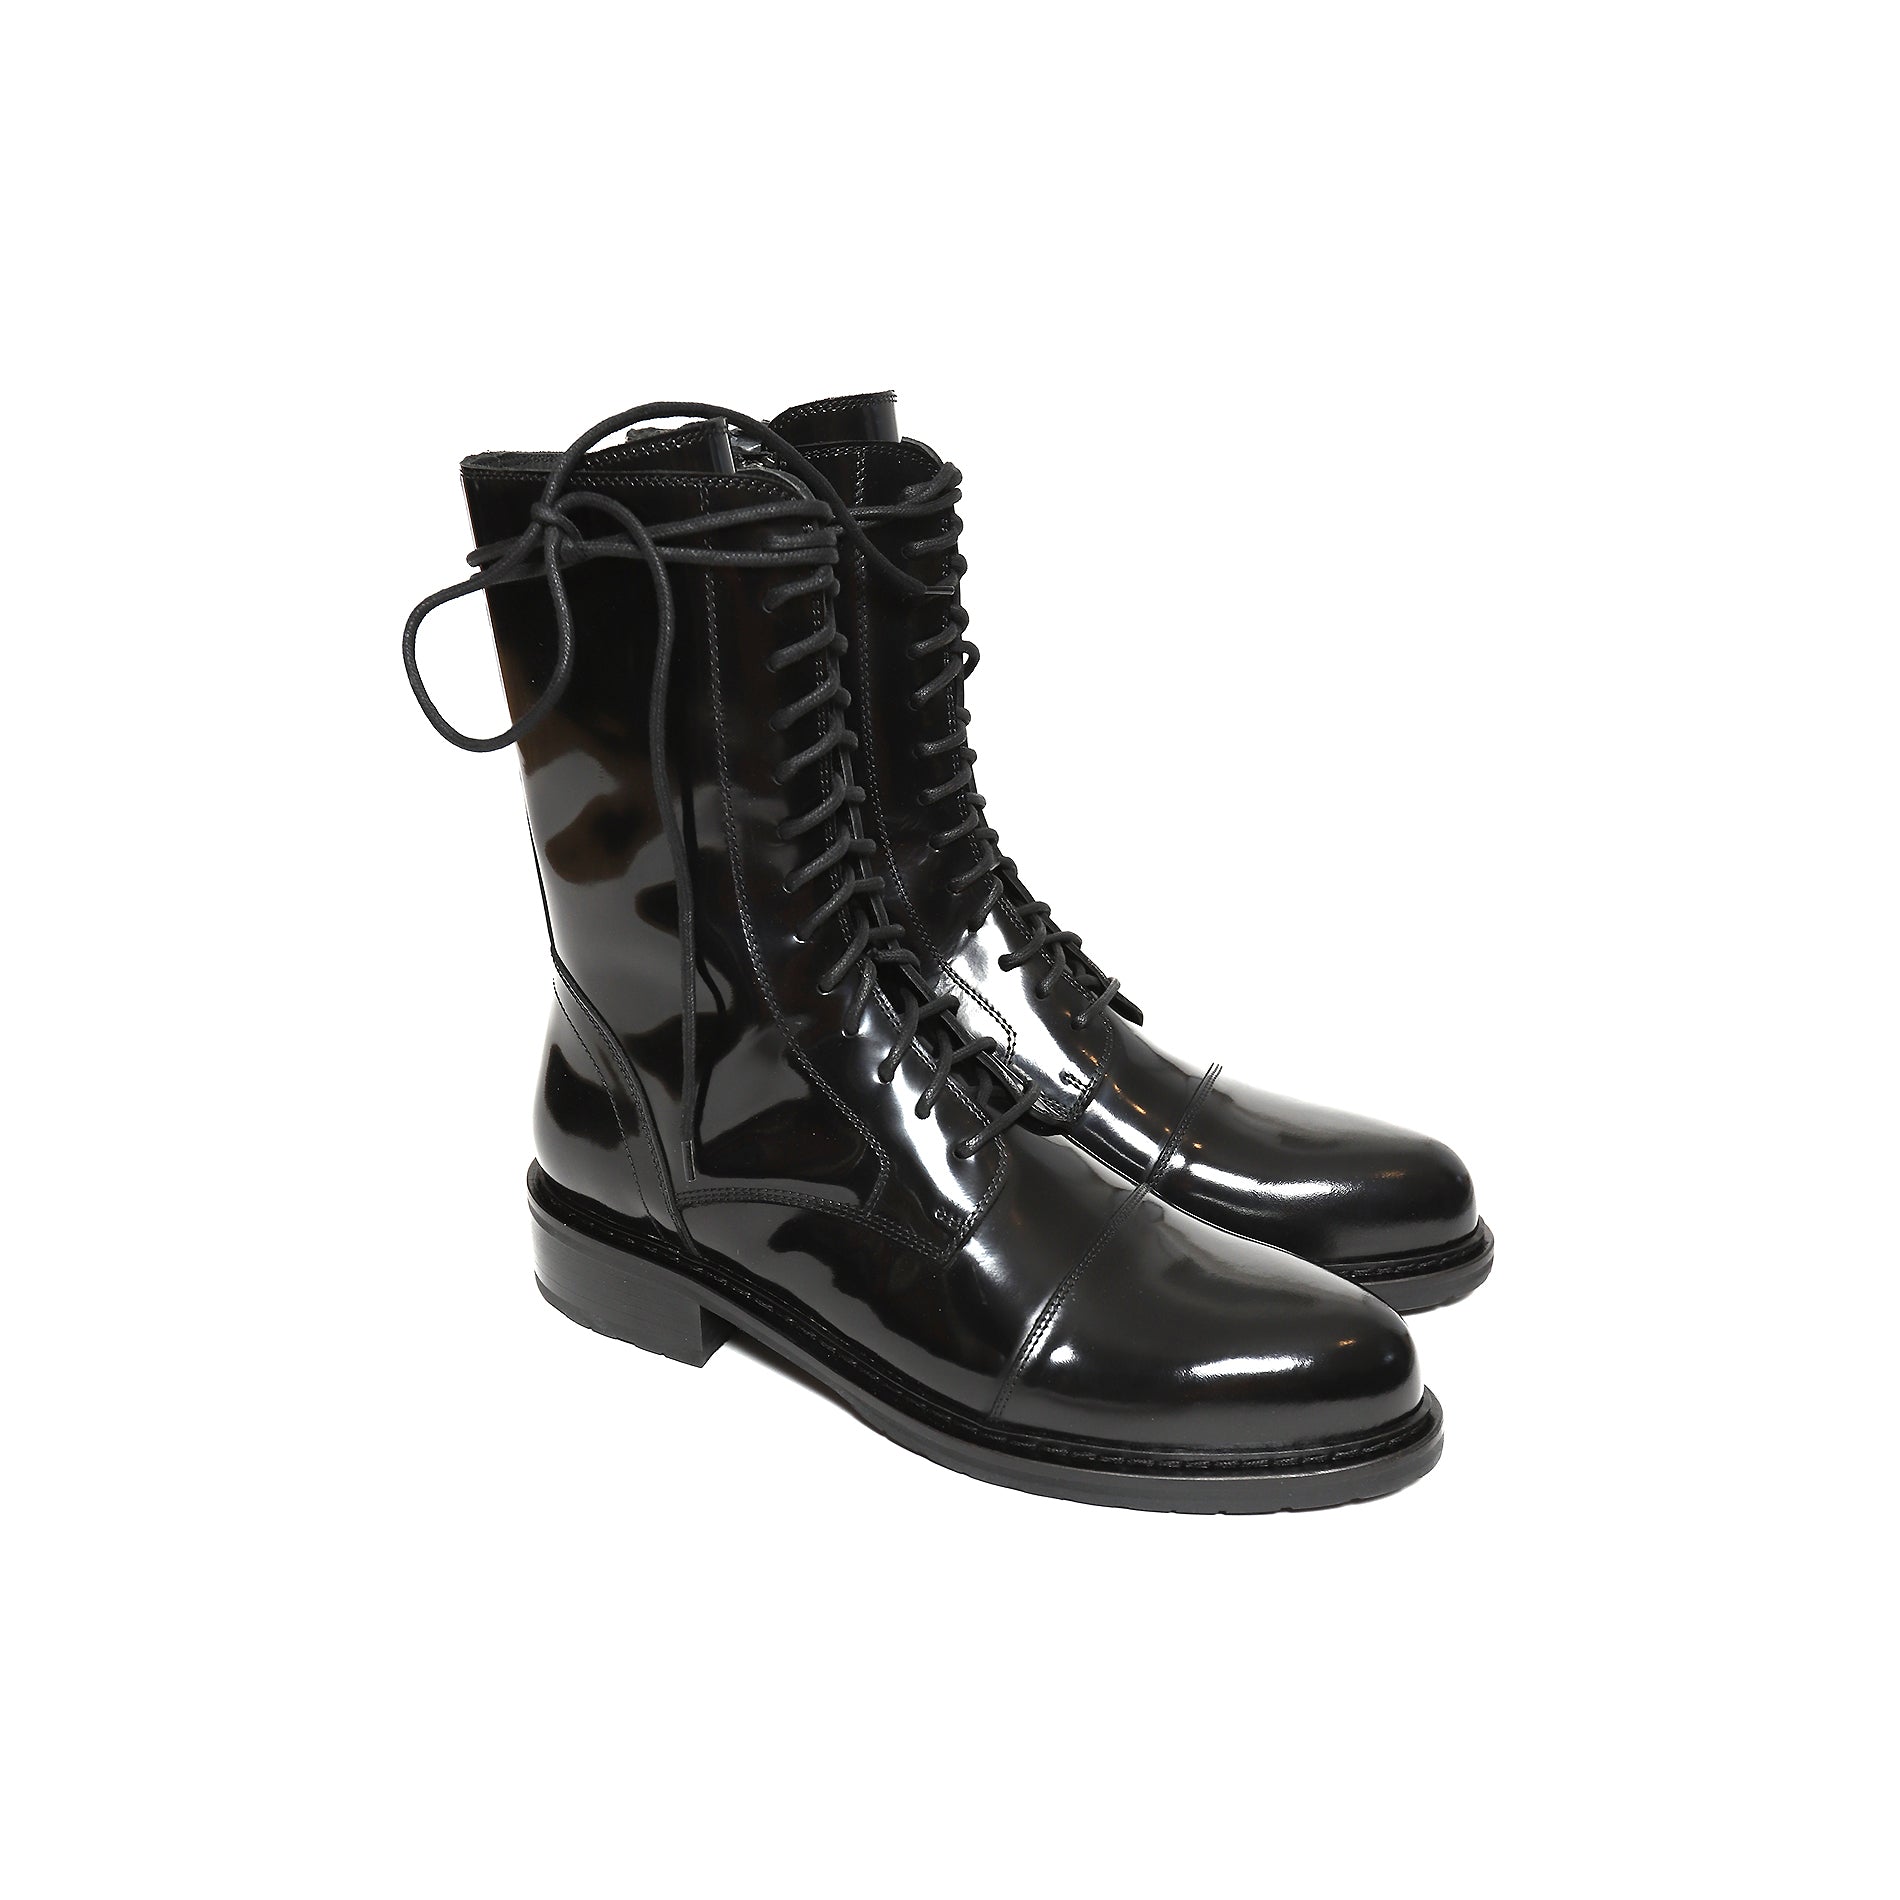 Ann Demeulemeester Black Patent Leather Lace-Up Combat Boots